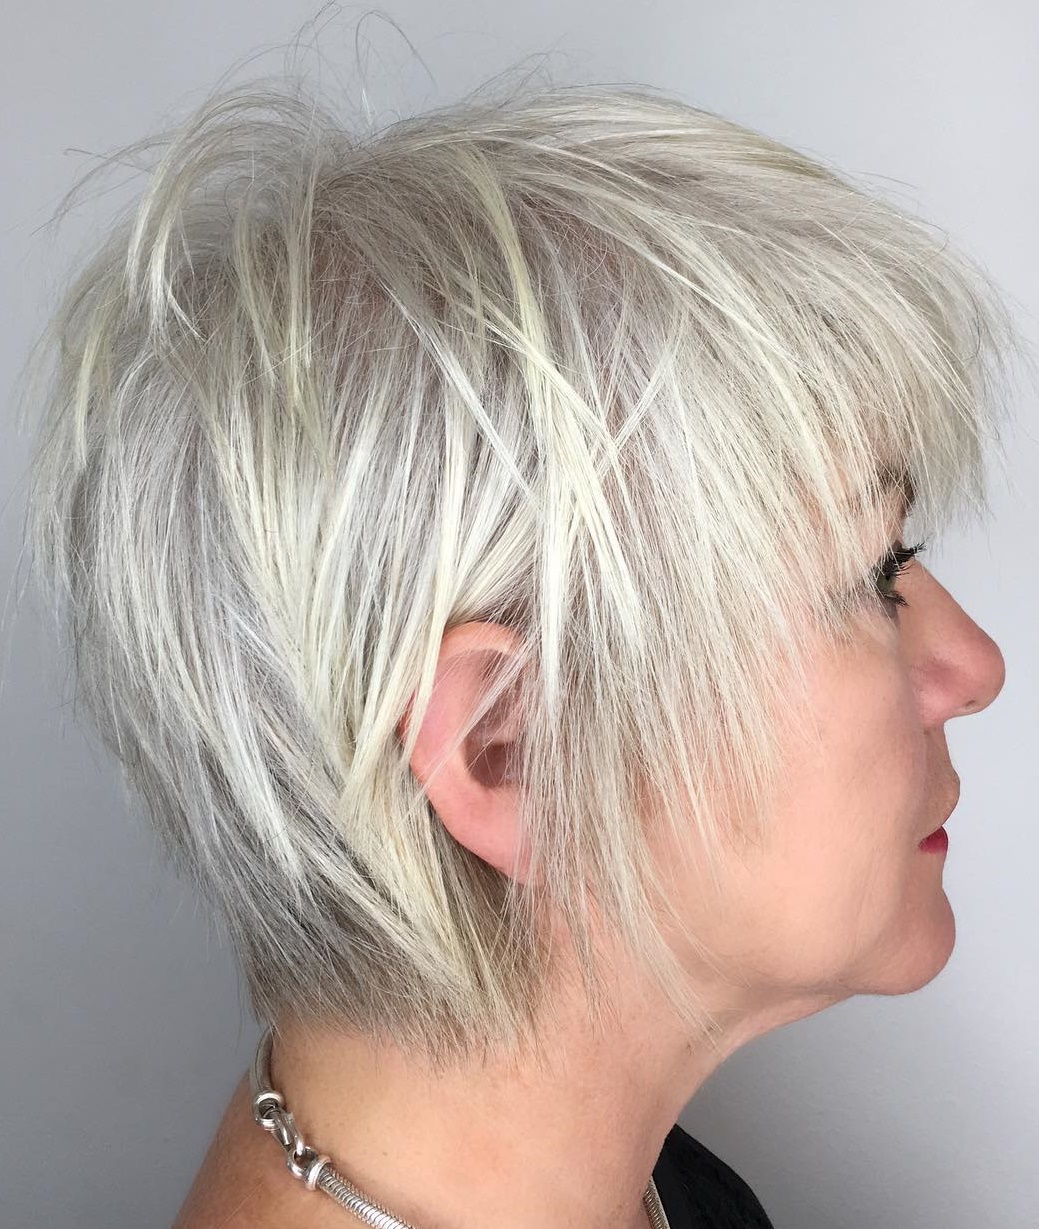 Here Are 5 Ideas for Short Choppy Hairstyles for Over 70